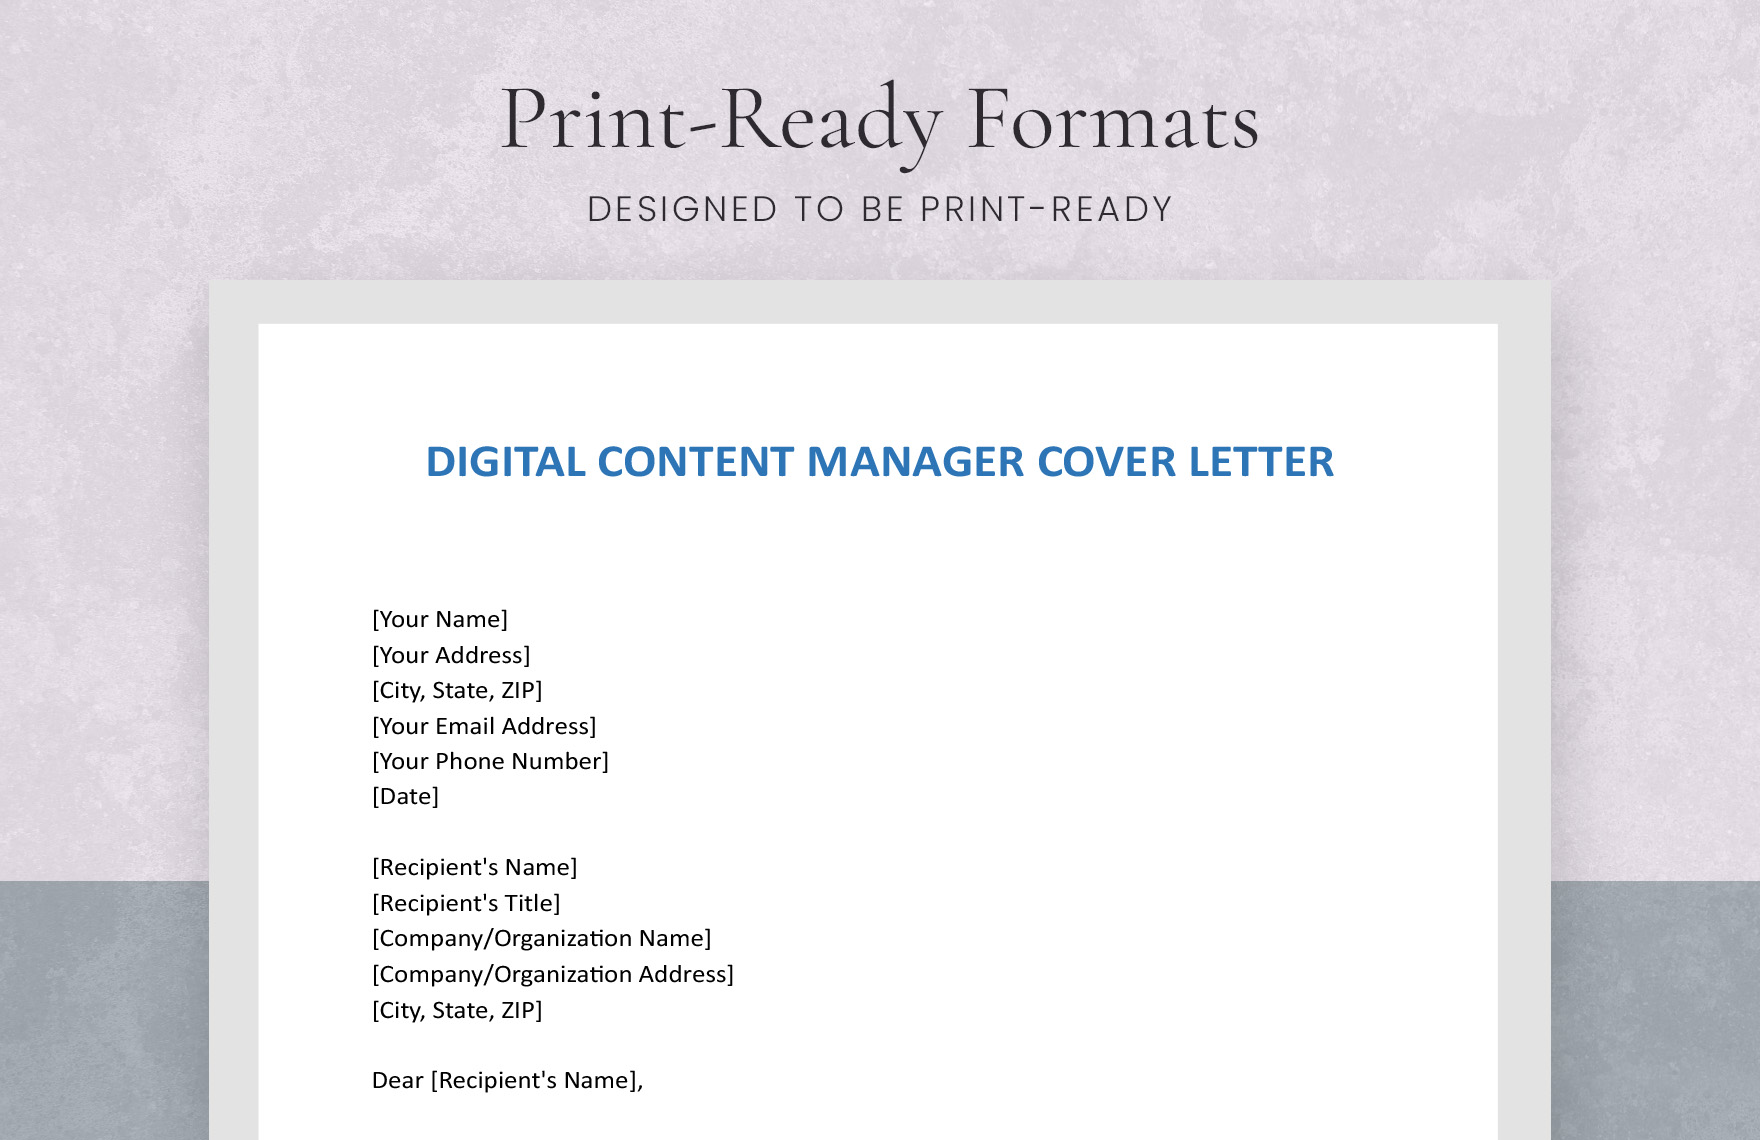 Digital Content Manager Cover Letter